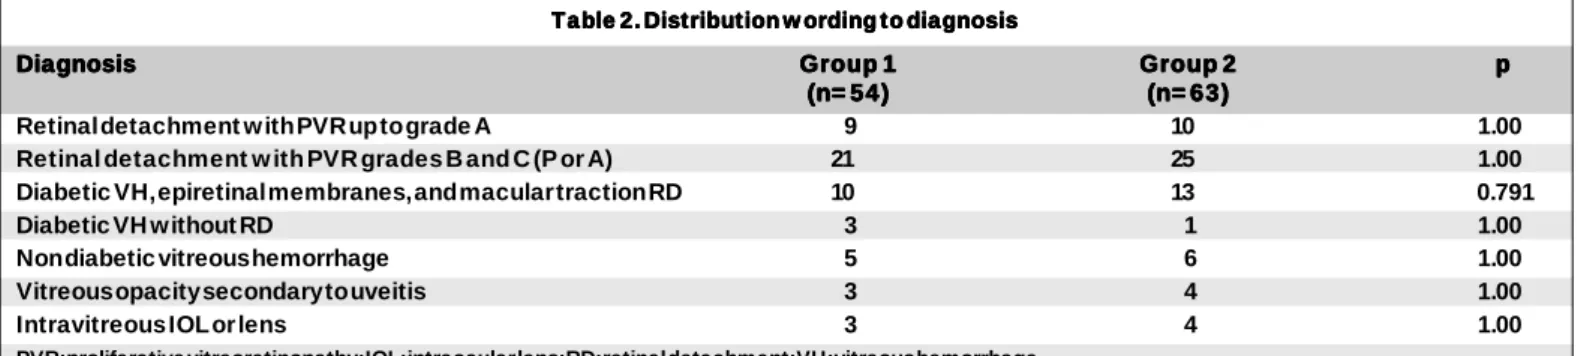 Table 2. Distribution w ording to diagnosisTable 2. Distribution w ording to diagnosisTable 2